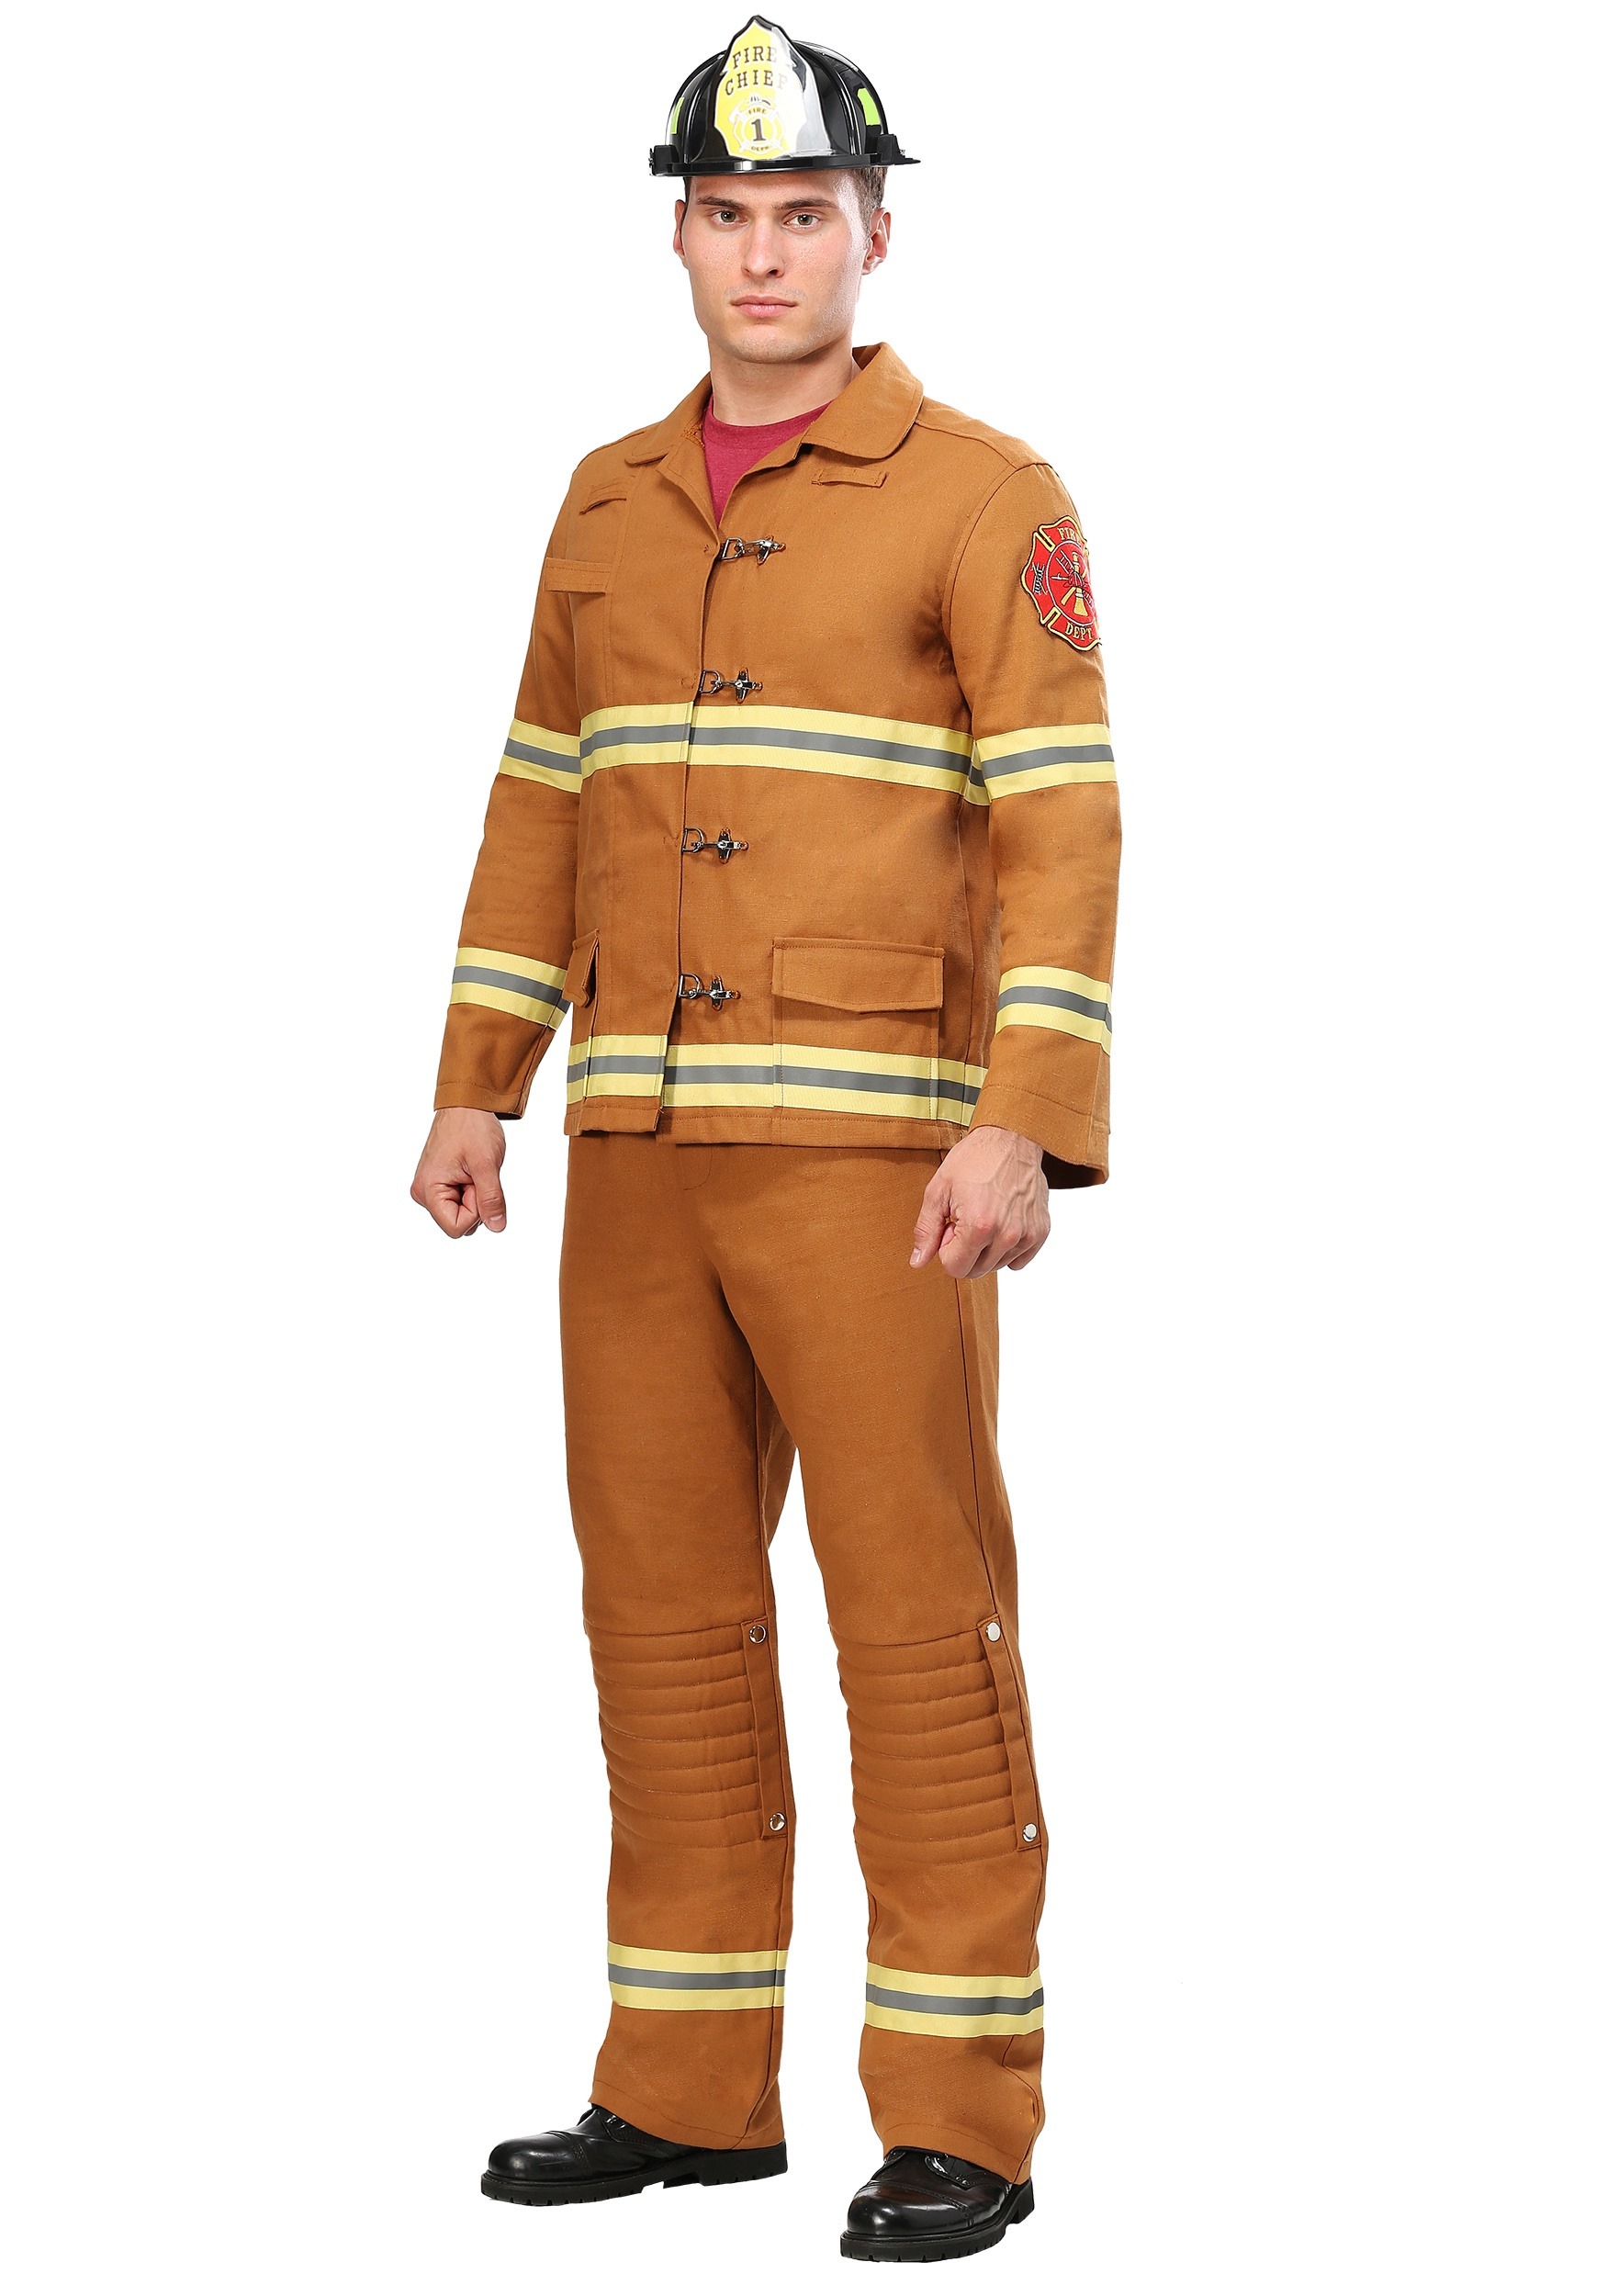 Tan Uniform Firefighter Costume for Adults